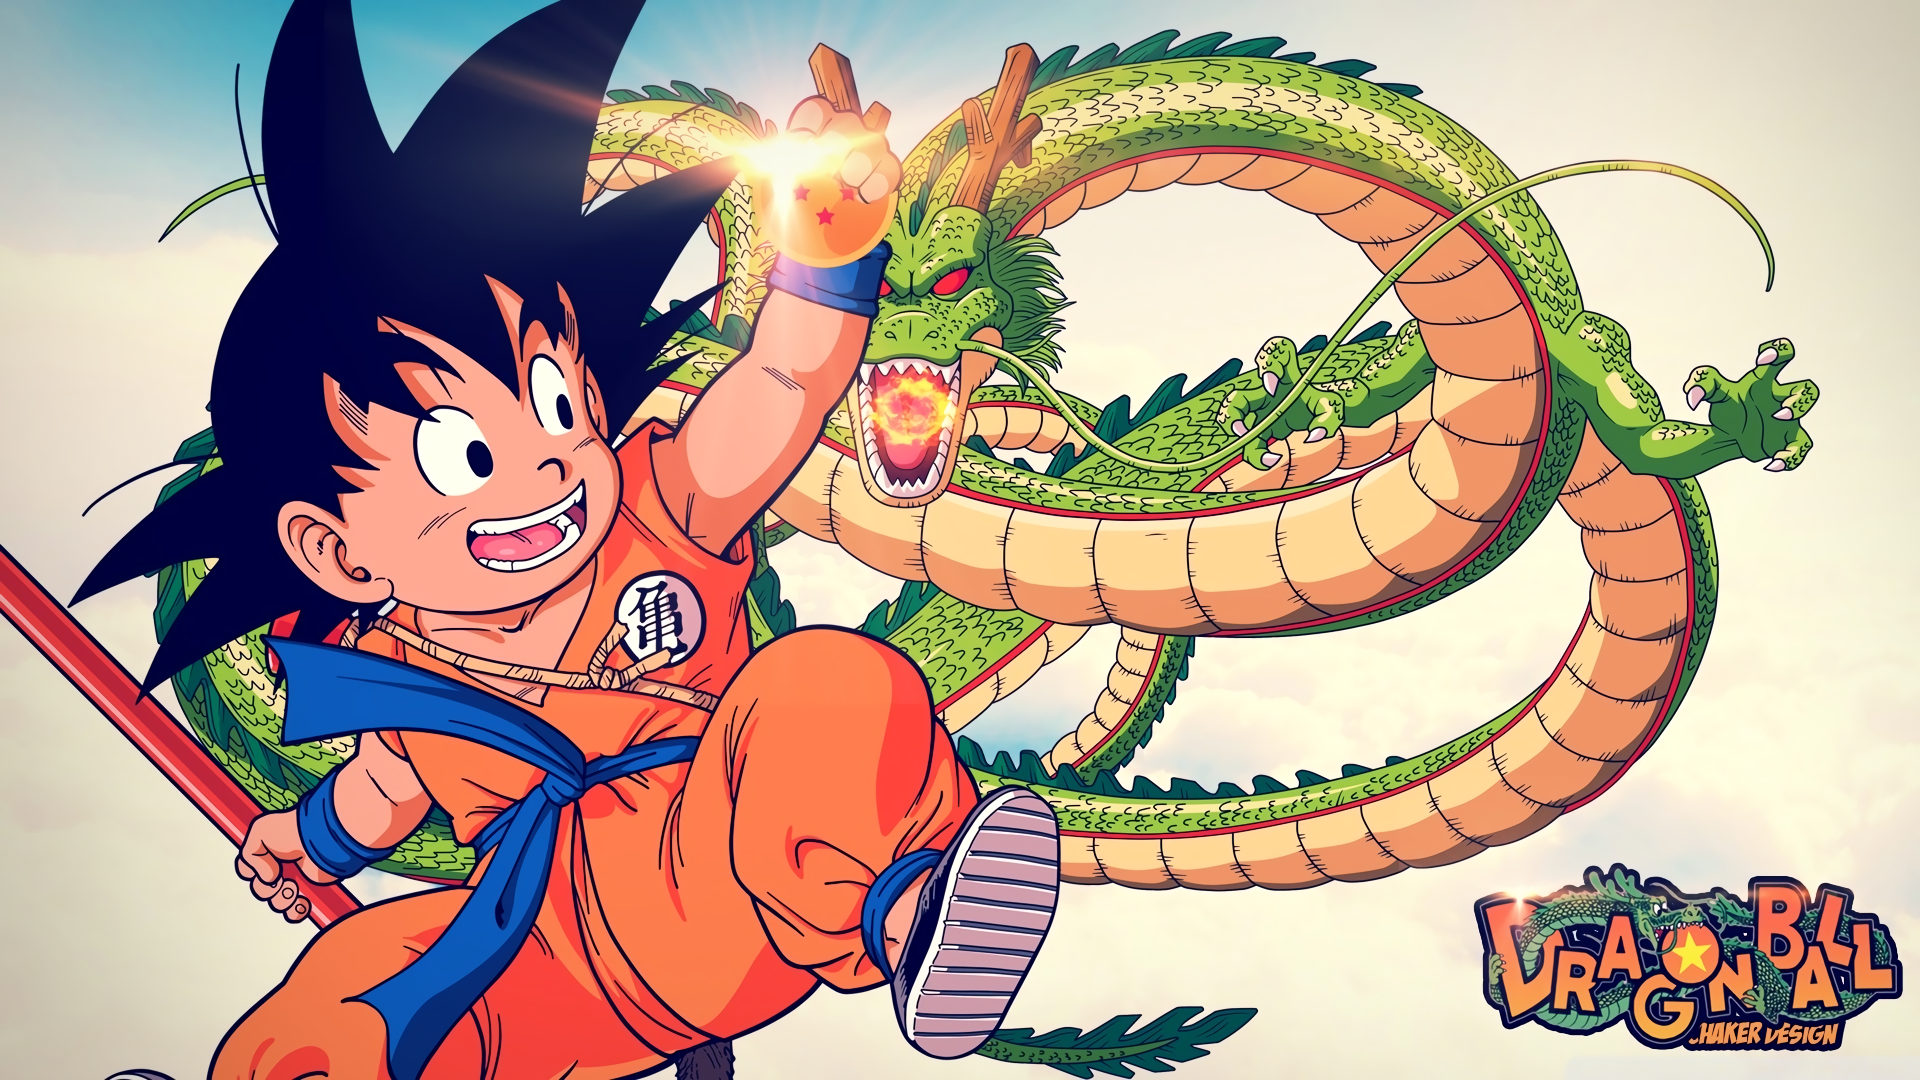 Dragon Ball Aesthetic PC Wallpapers - Wallpaper Cave.